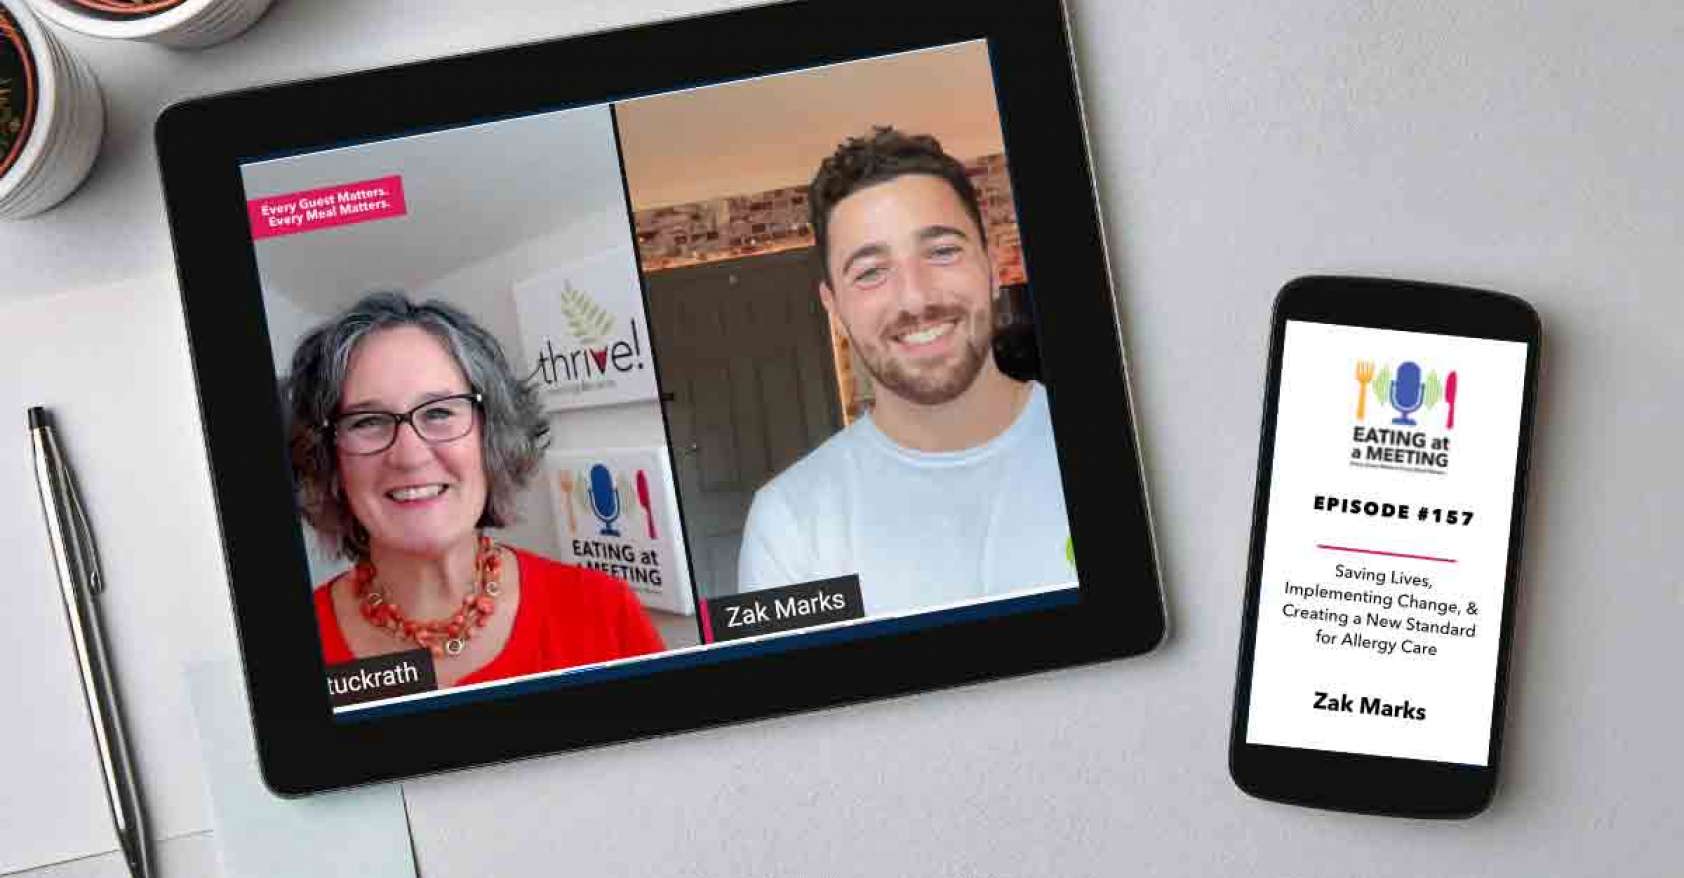 An iPad and iPhone on a table. On the iPad is a picture of two men who are on video screen. On the iPhone is the Eating at a Meeting podcast logo with Episode #157 Saving Lives, Implementing Change, & Creating a New Standard for Allergy Care with Zak Marks